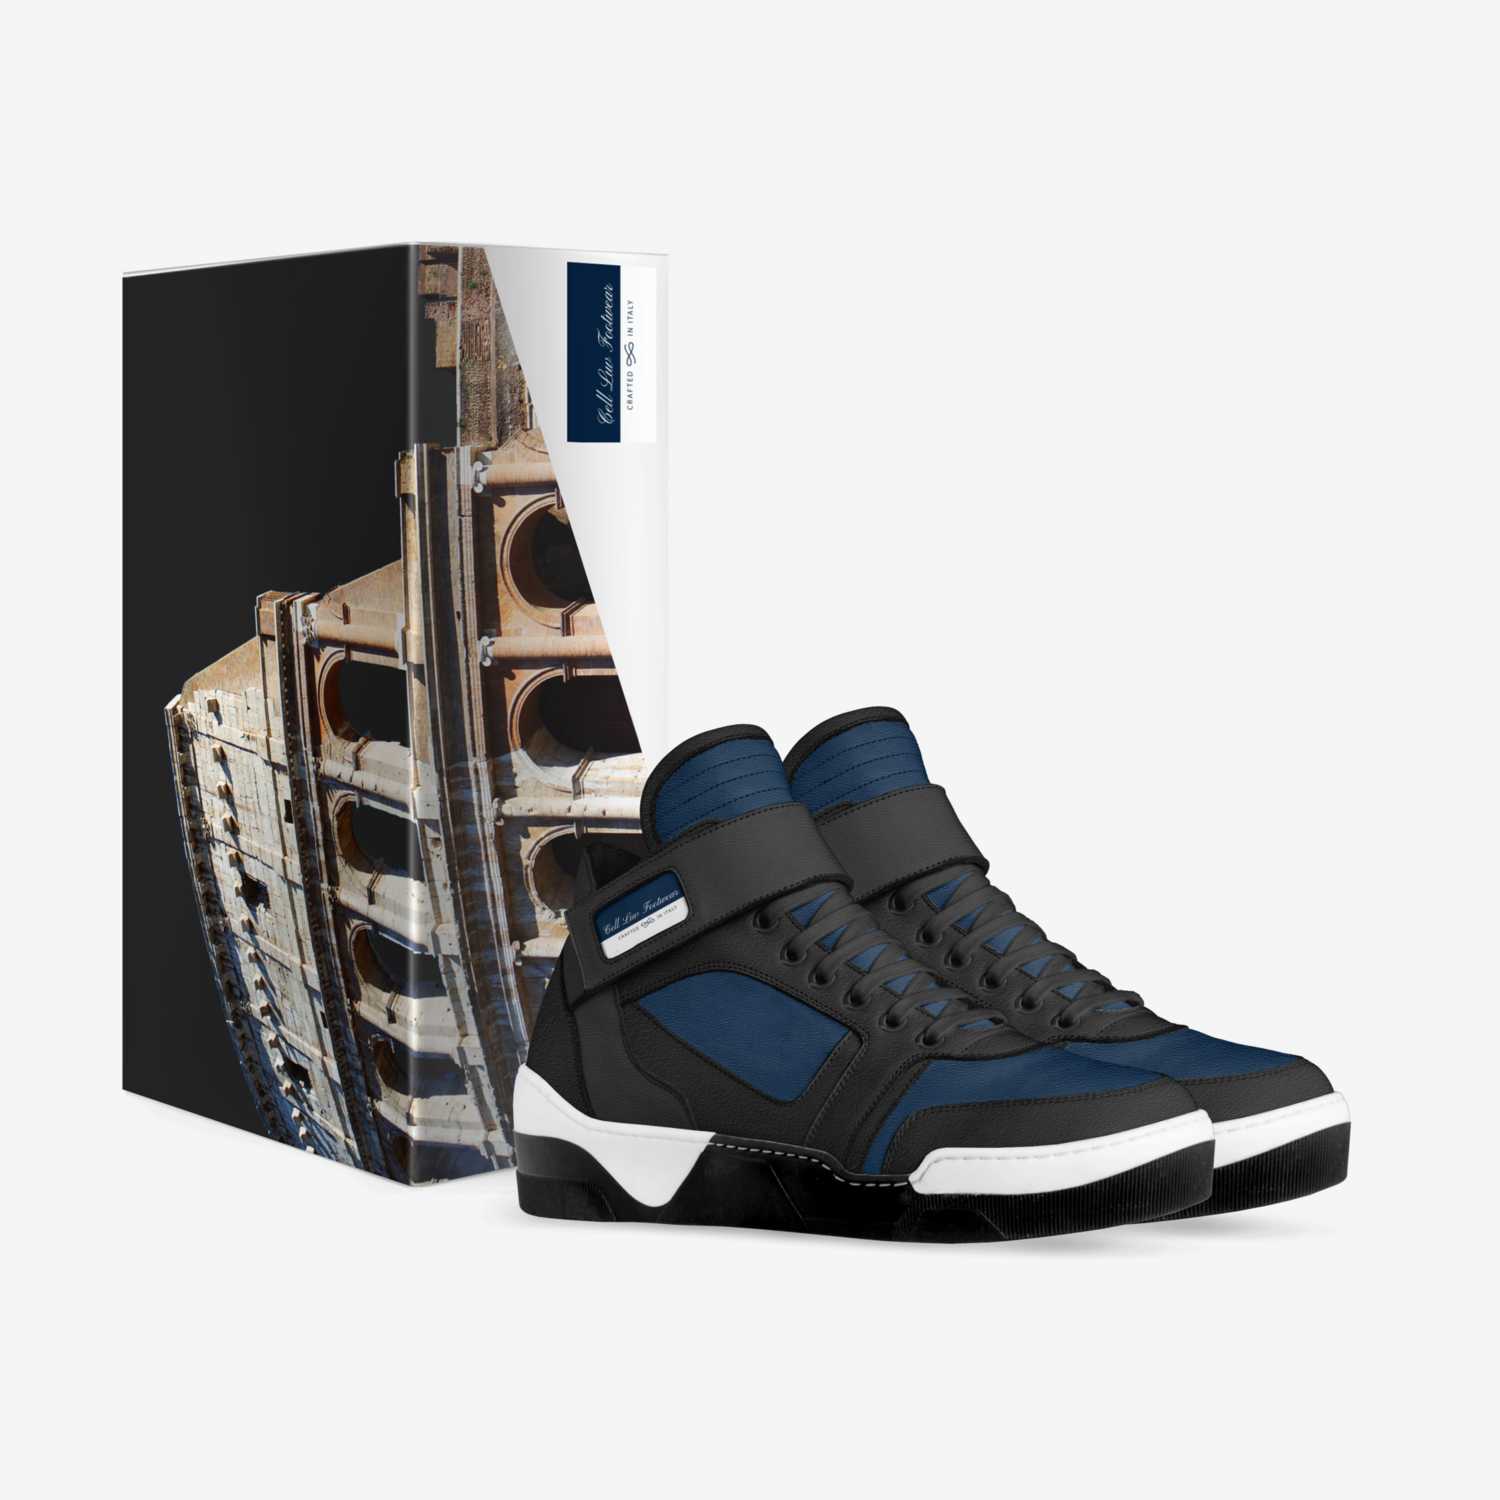 Cell Luv footwear custom made in Italy shoes by Michael Acocella | Box view